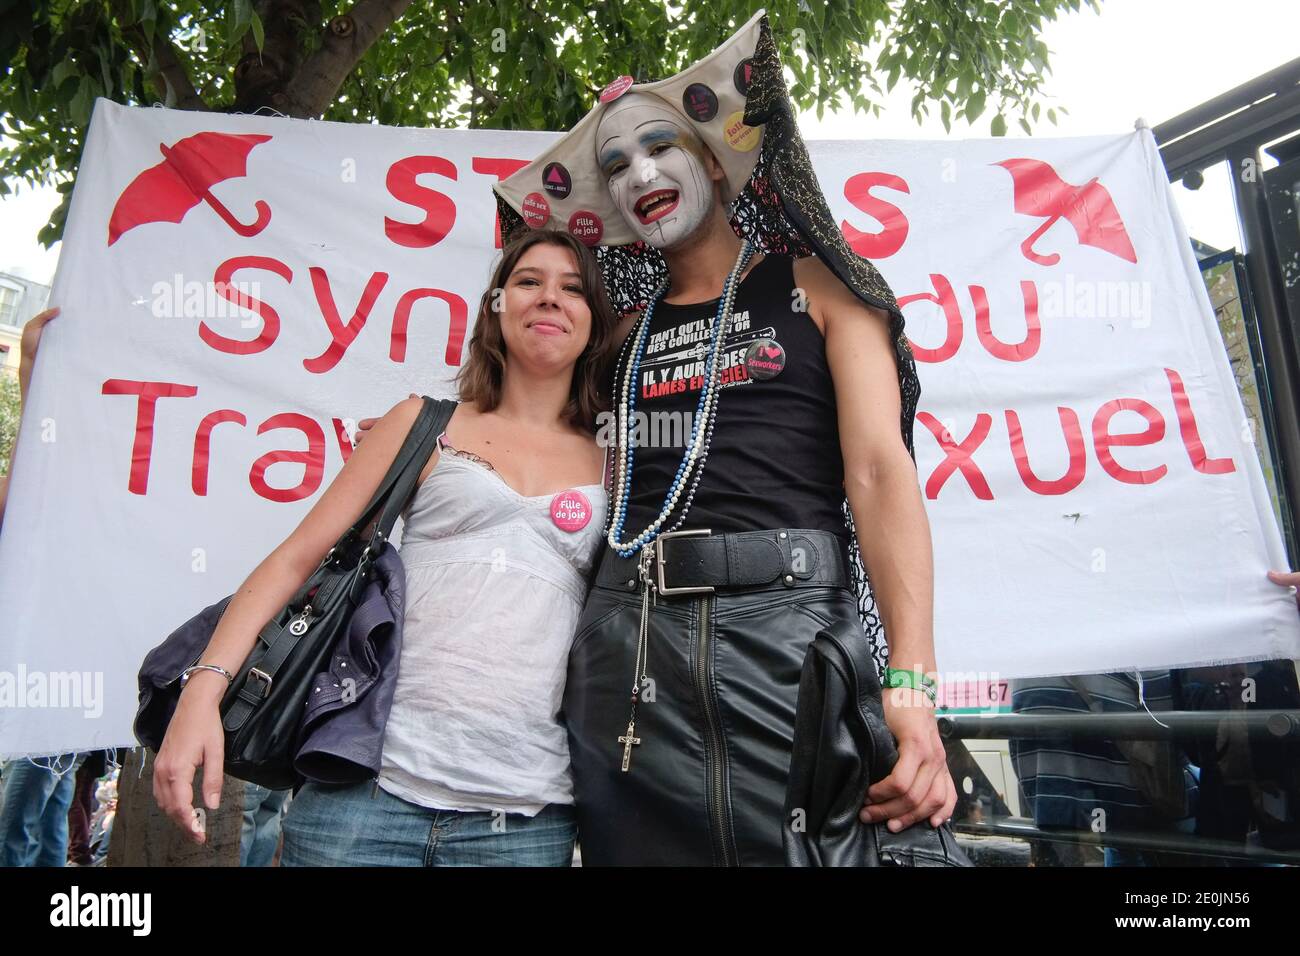 Prostitutes protest against the project of law for the abolition of  prostitution and the penalization of the customers in Paris, France, on  July 7, 2012. The legislation project is defended by French